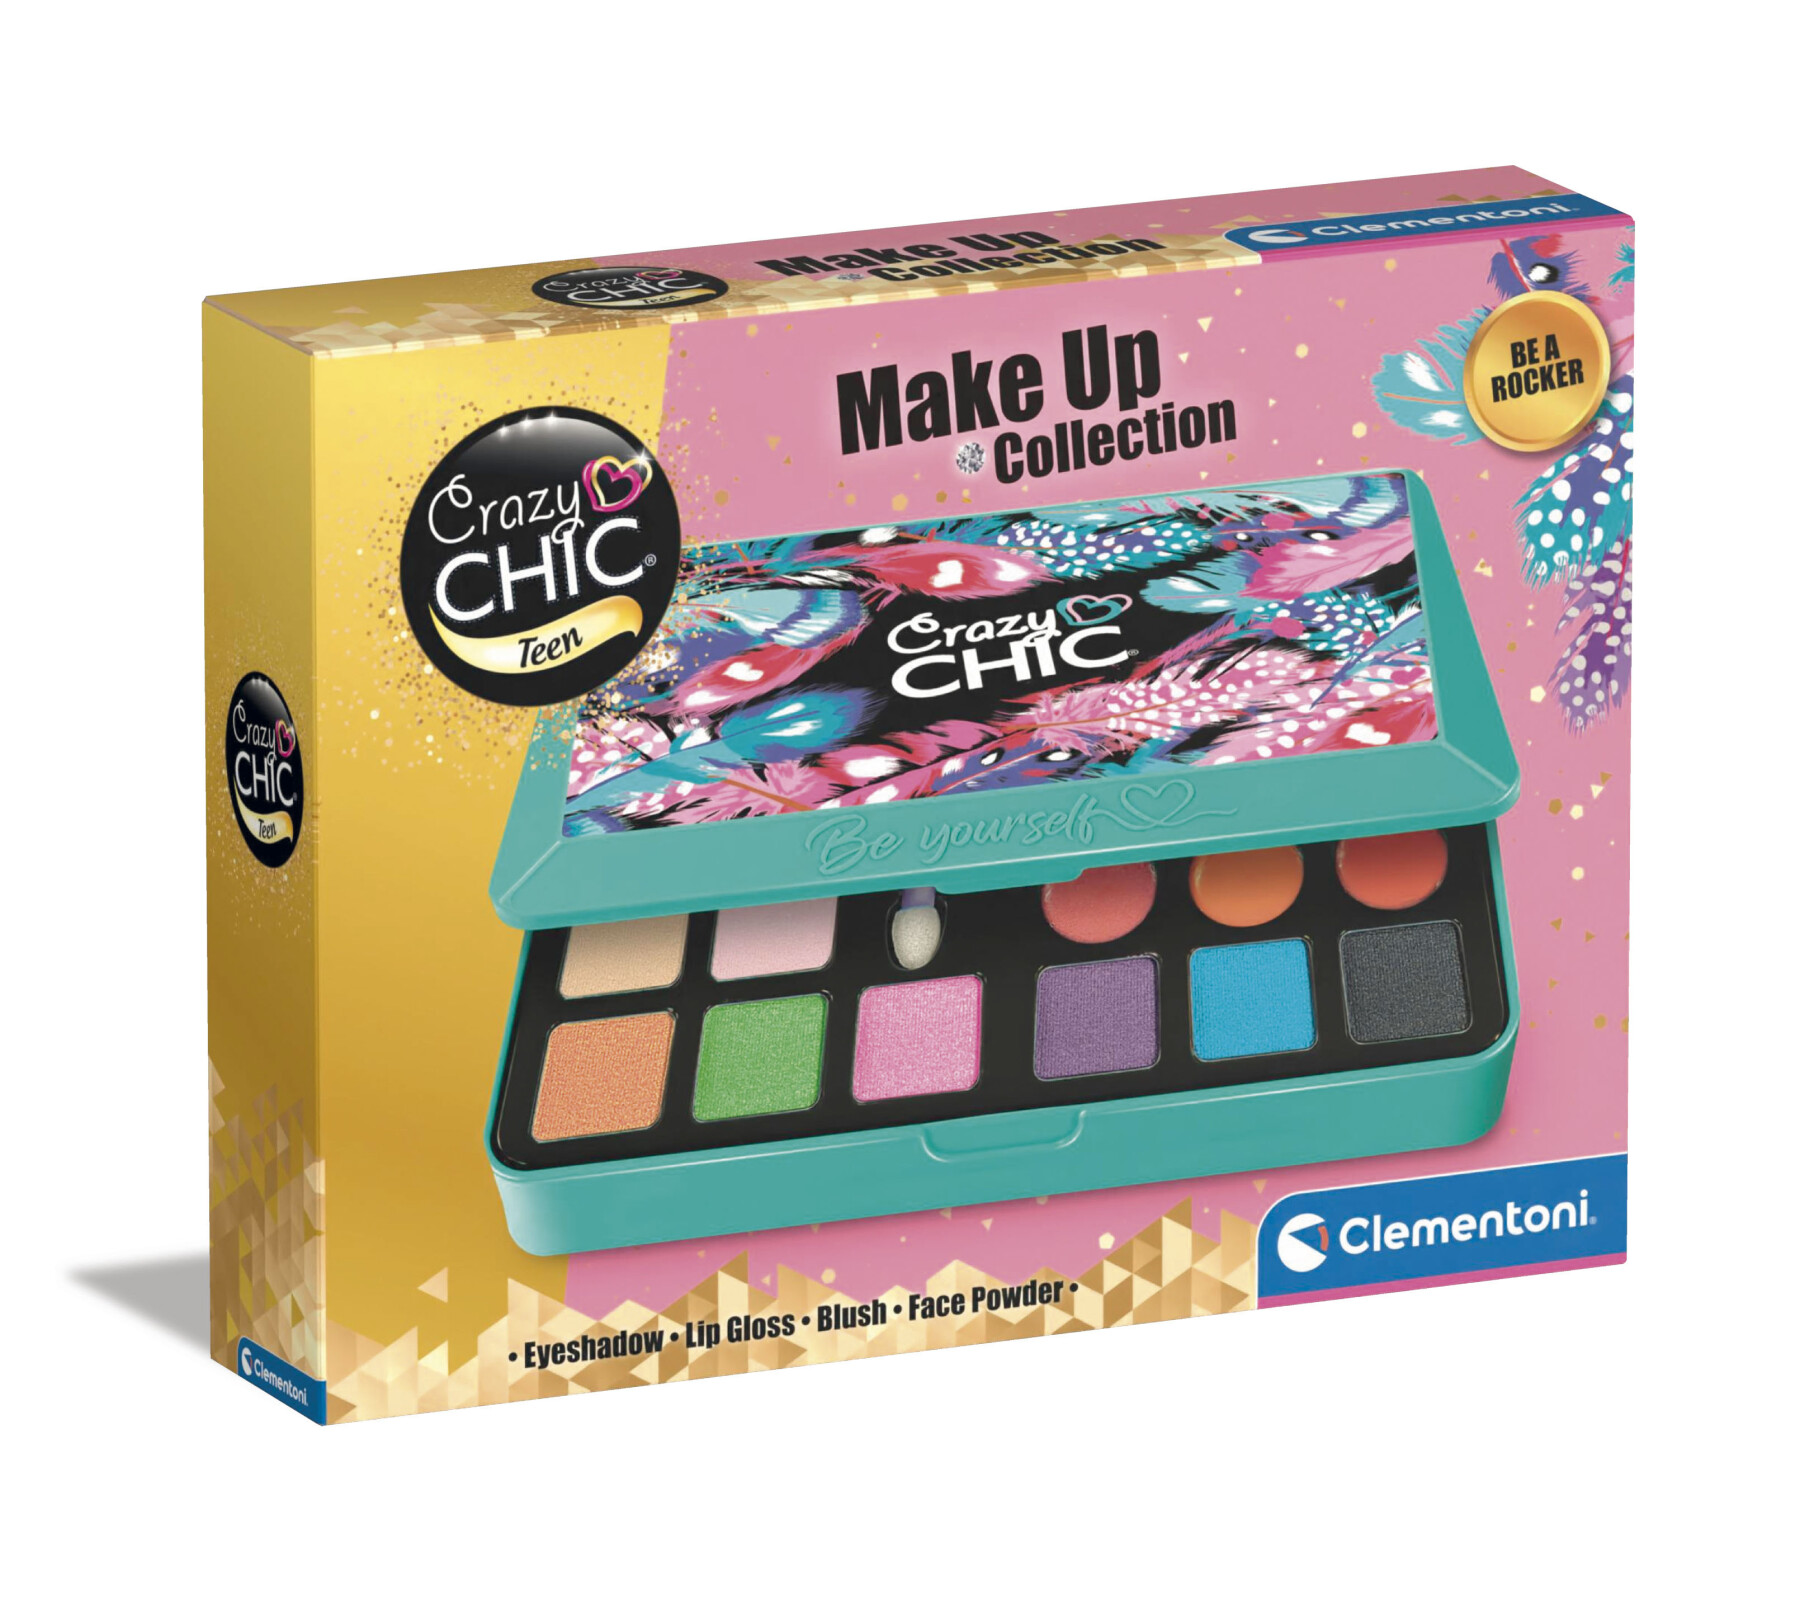 Crazy chic be yourself collection be a rocker - CRAZY CHIC